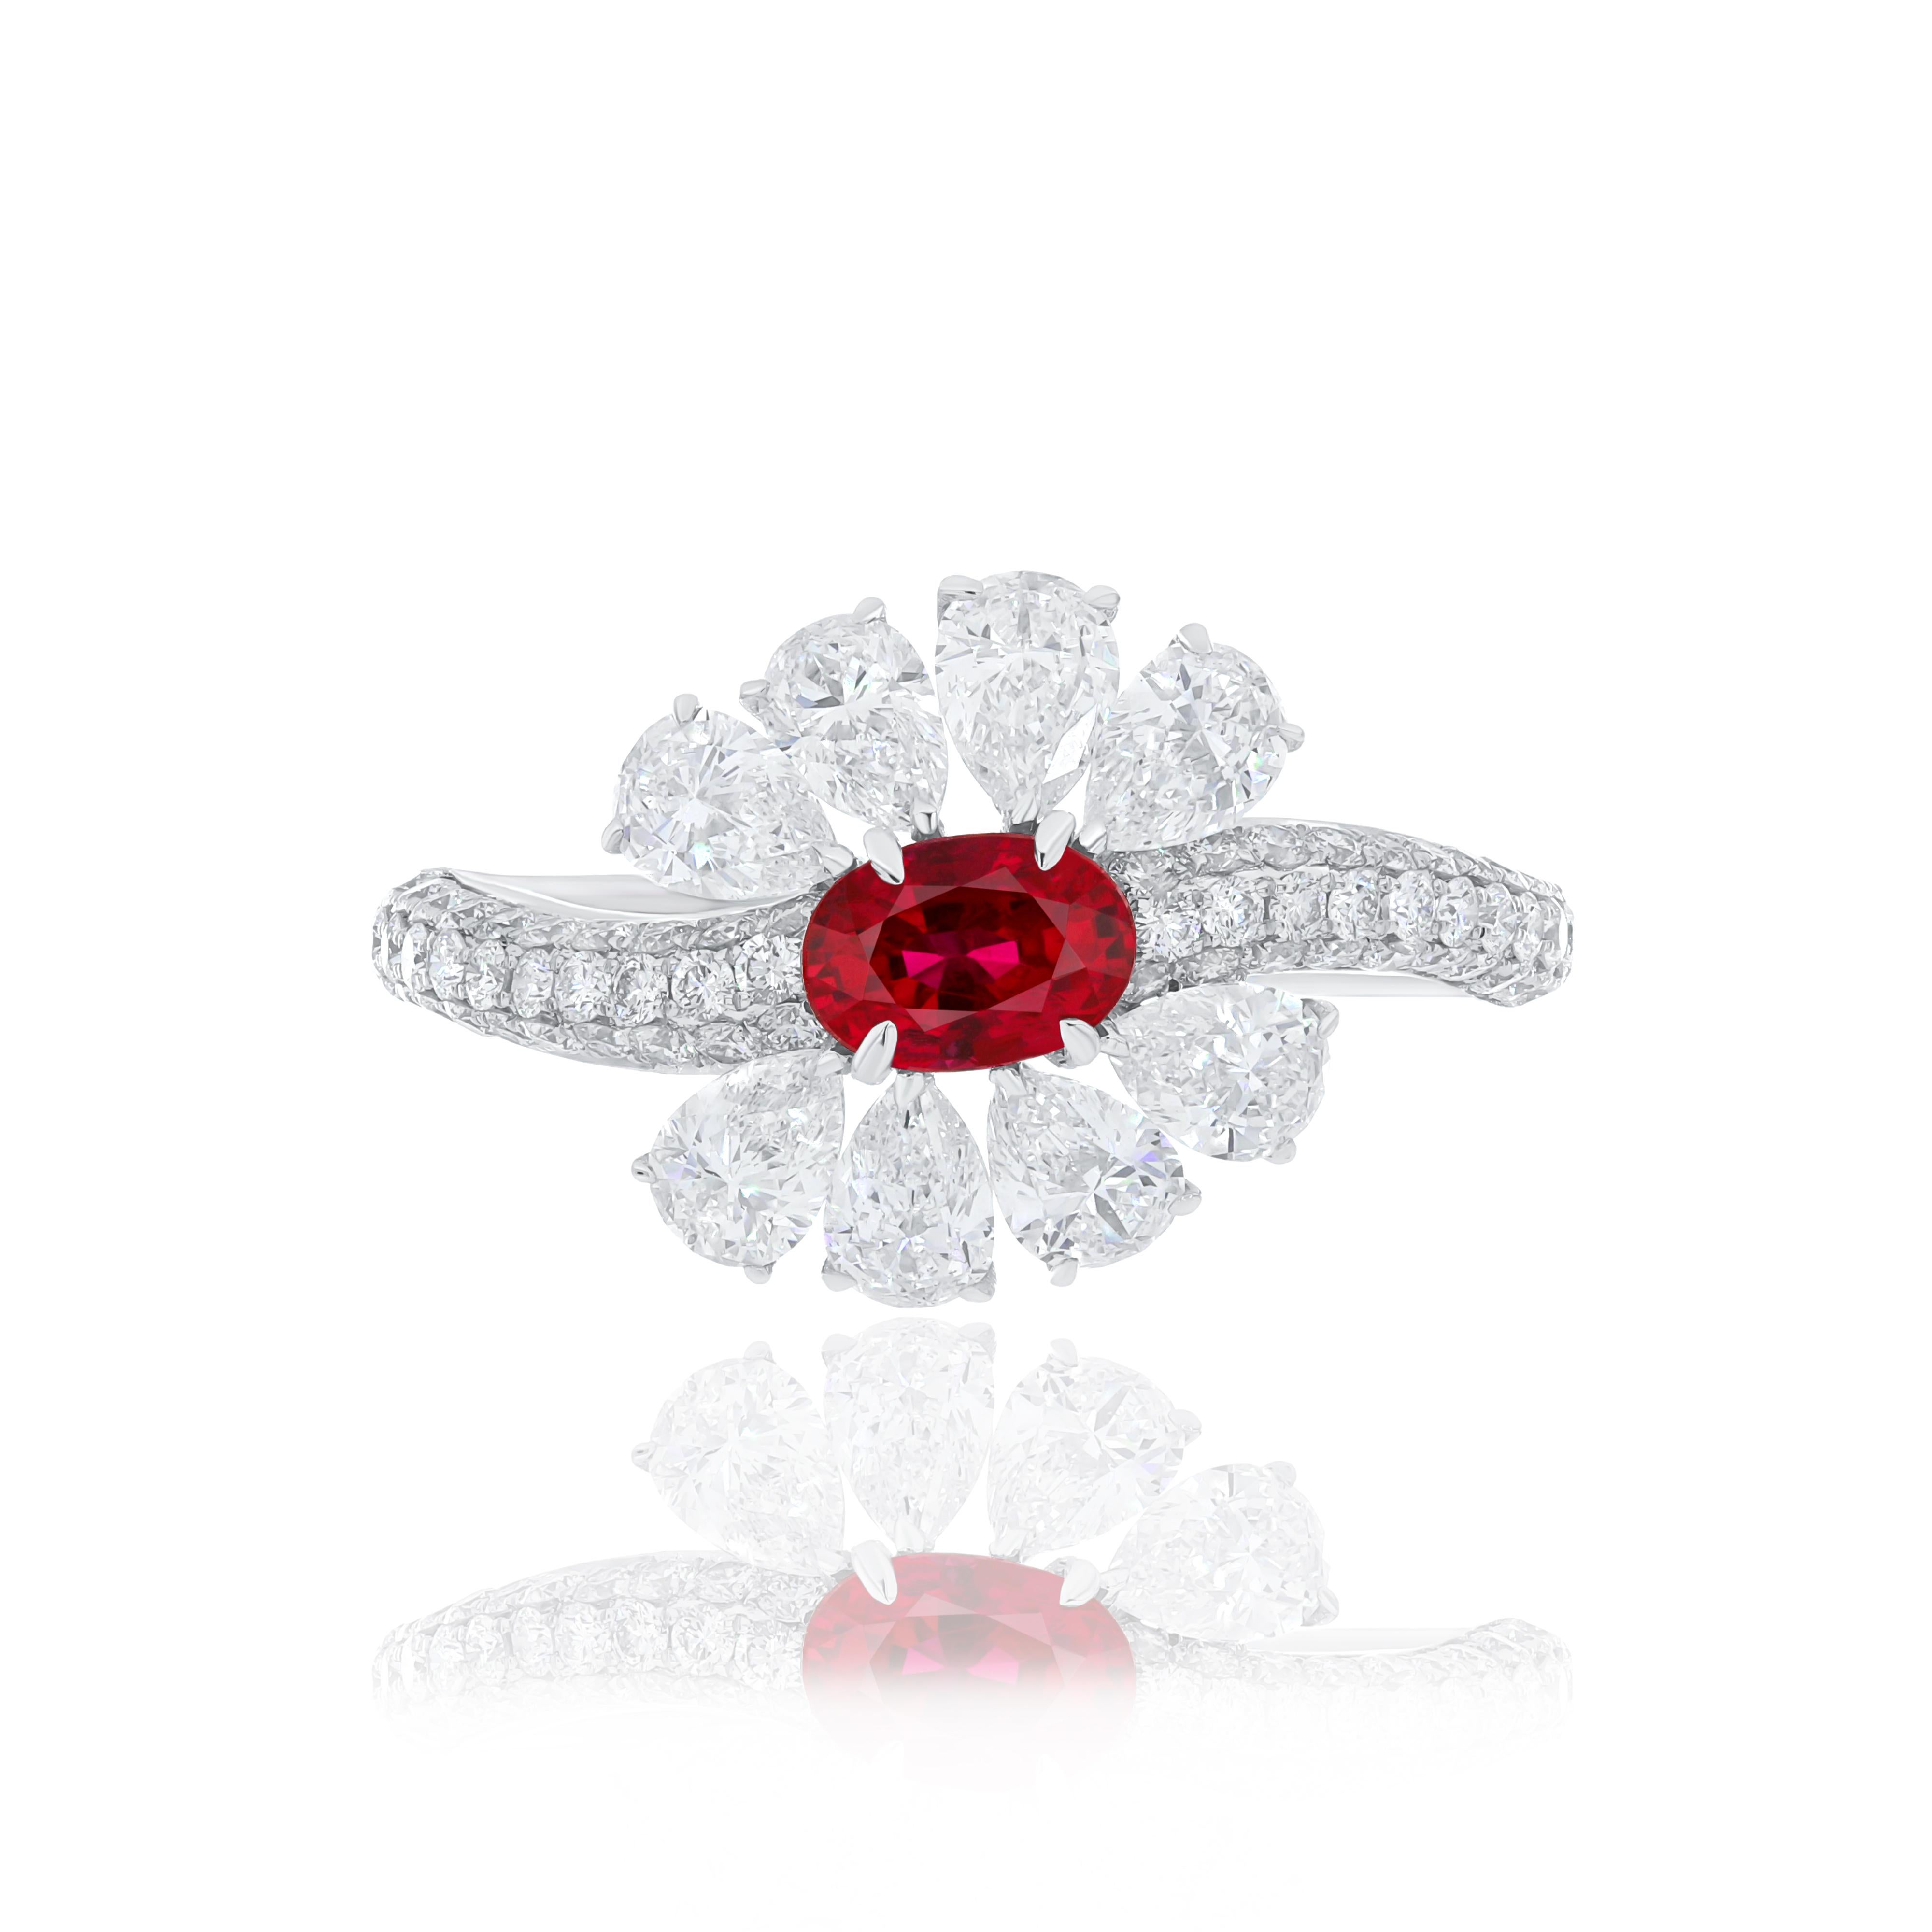 Elegant and exquisitely detailed 18 Karat White Gold Ring, center set with 0.65 Cts .Oval Shape deep red natural Ruby and micro pave set Diamonds, weighing approx. 2.11 Cts Beautifully Hand crafted in 18 Karat White Gold.

Stone Detail:
Ruby Burma: